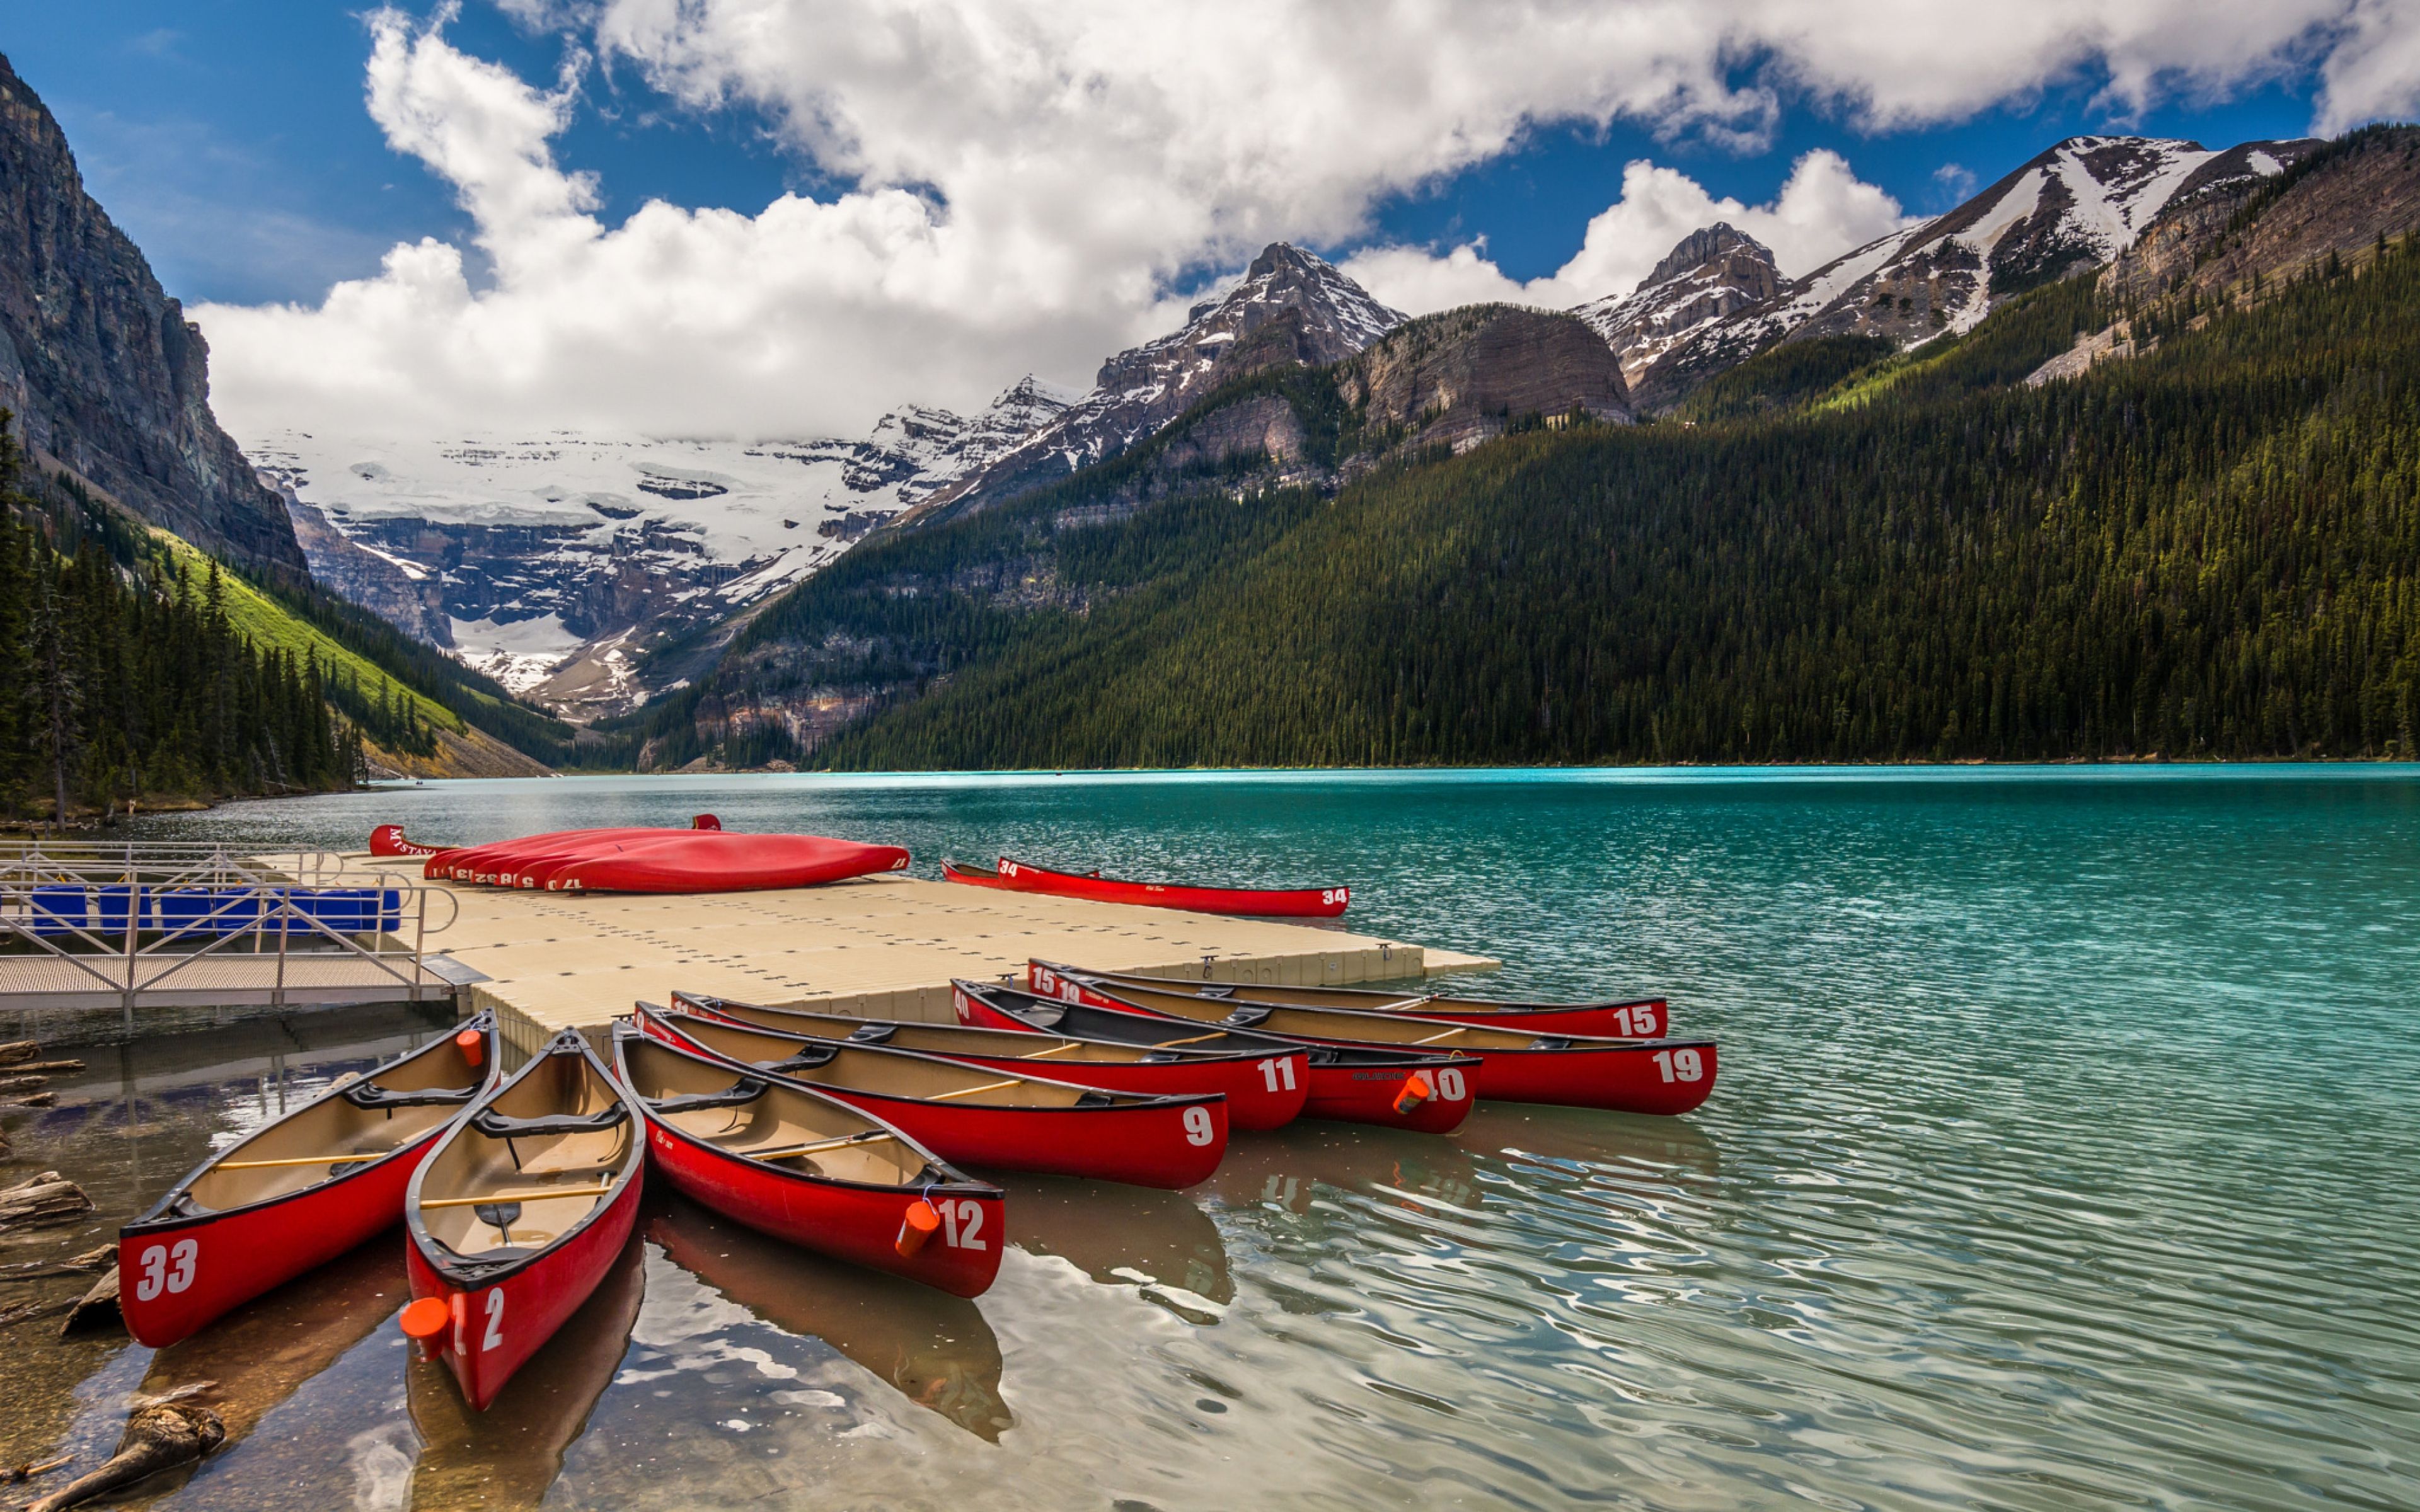 Lake Louise Is A Hamlet In Alberta Canada Banff National Park